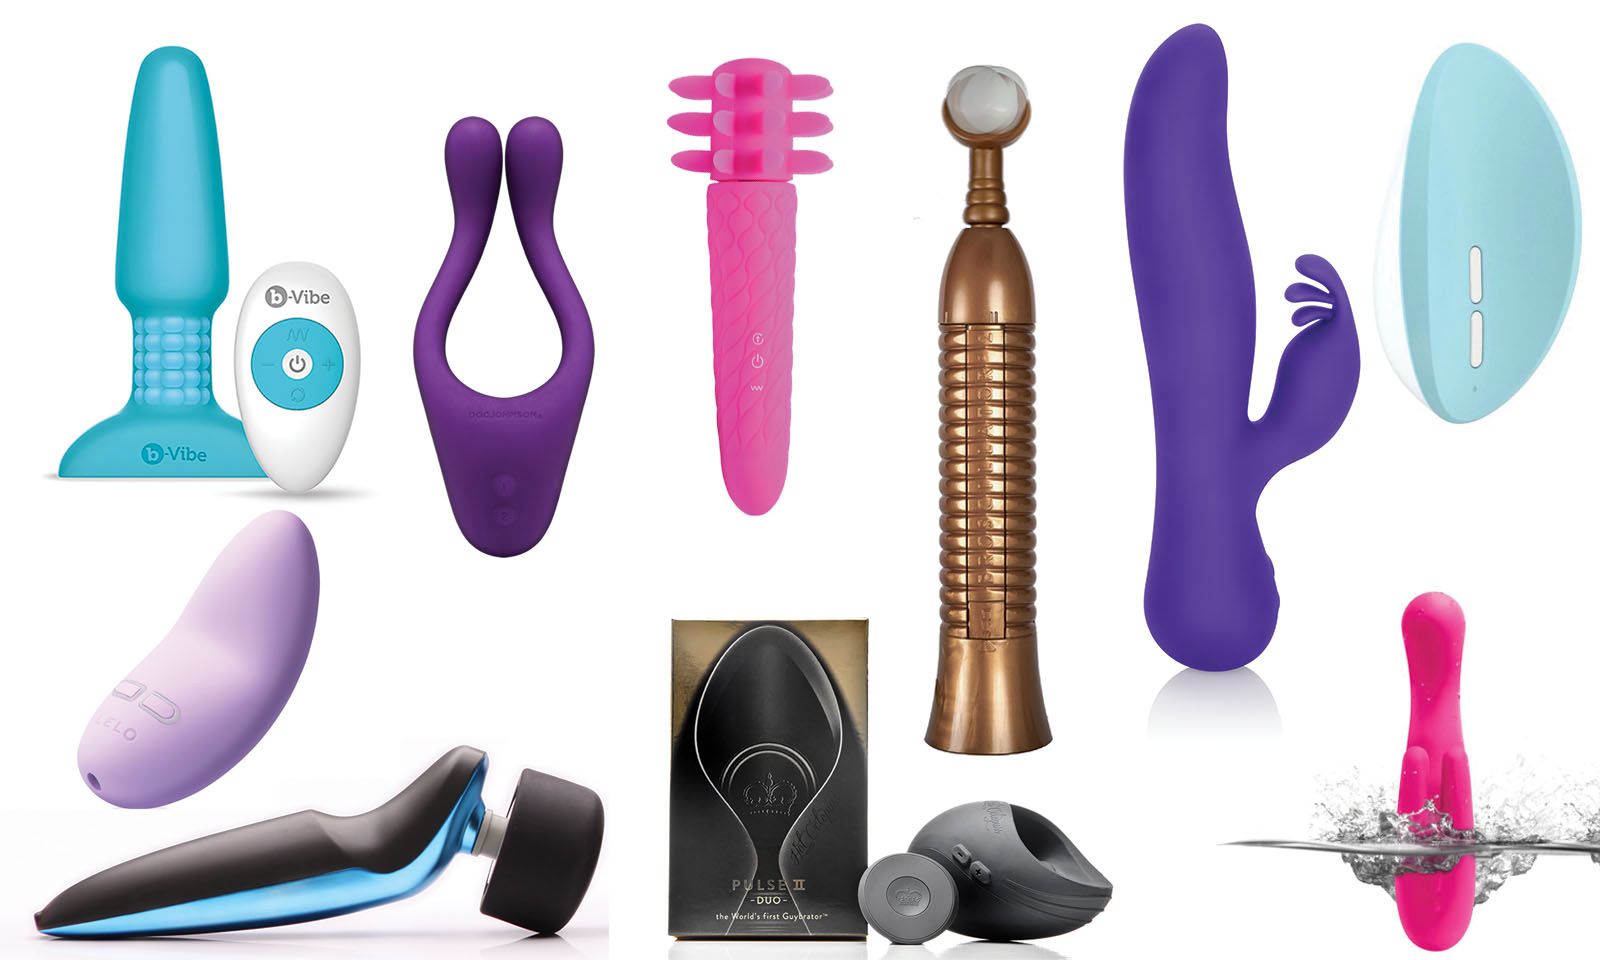 The History of O: Ten Trends in Vibrator Design